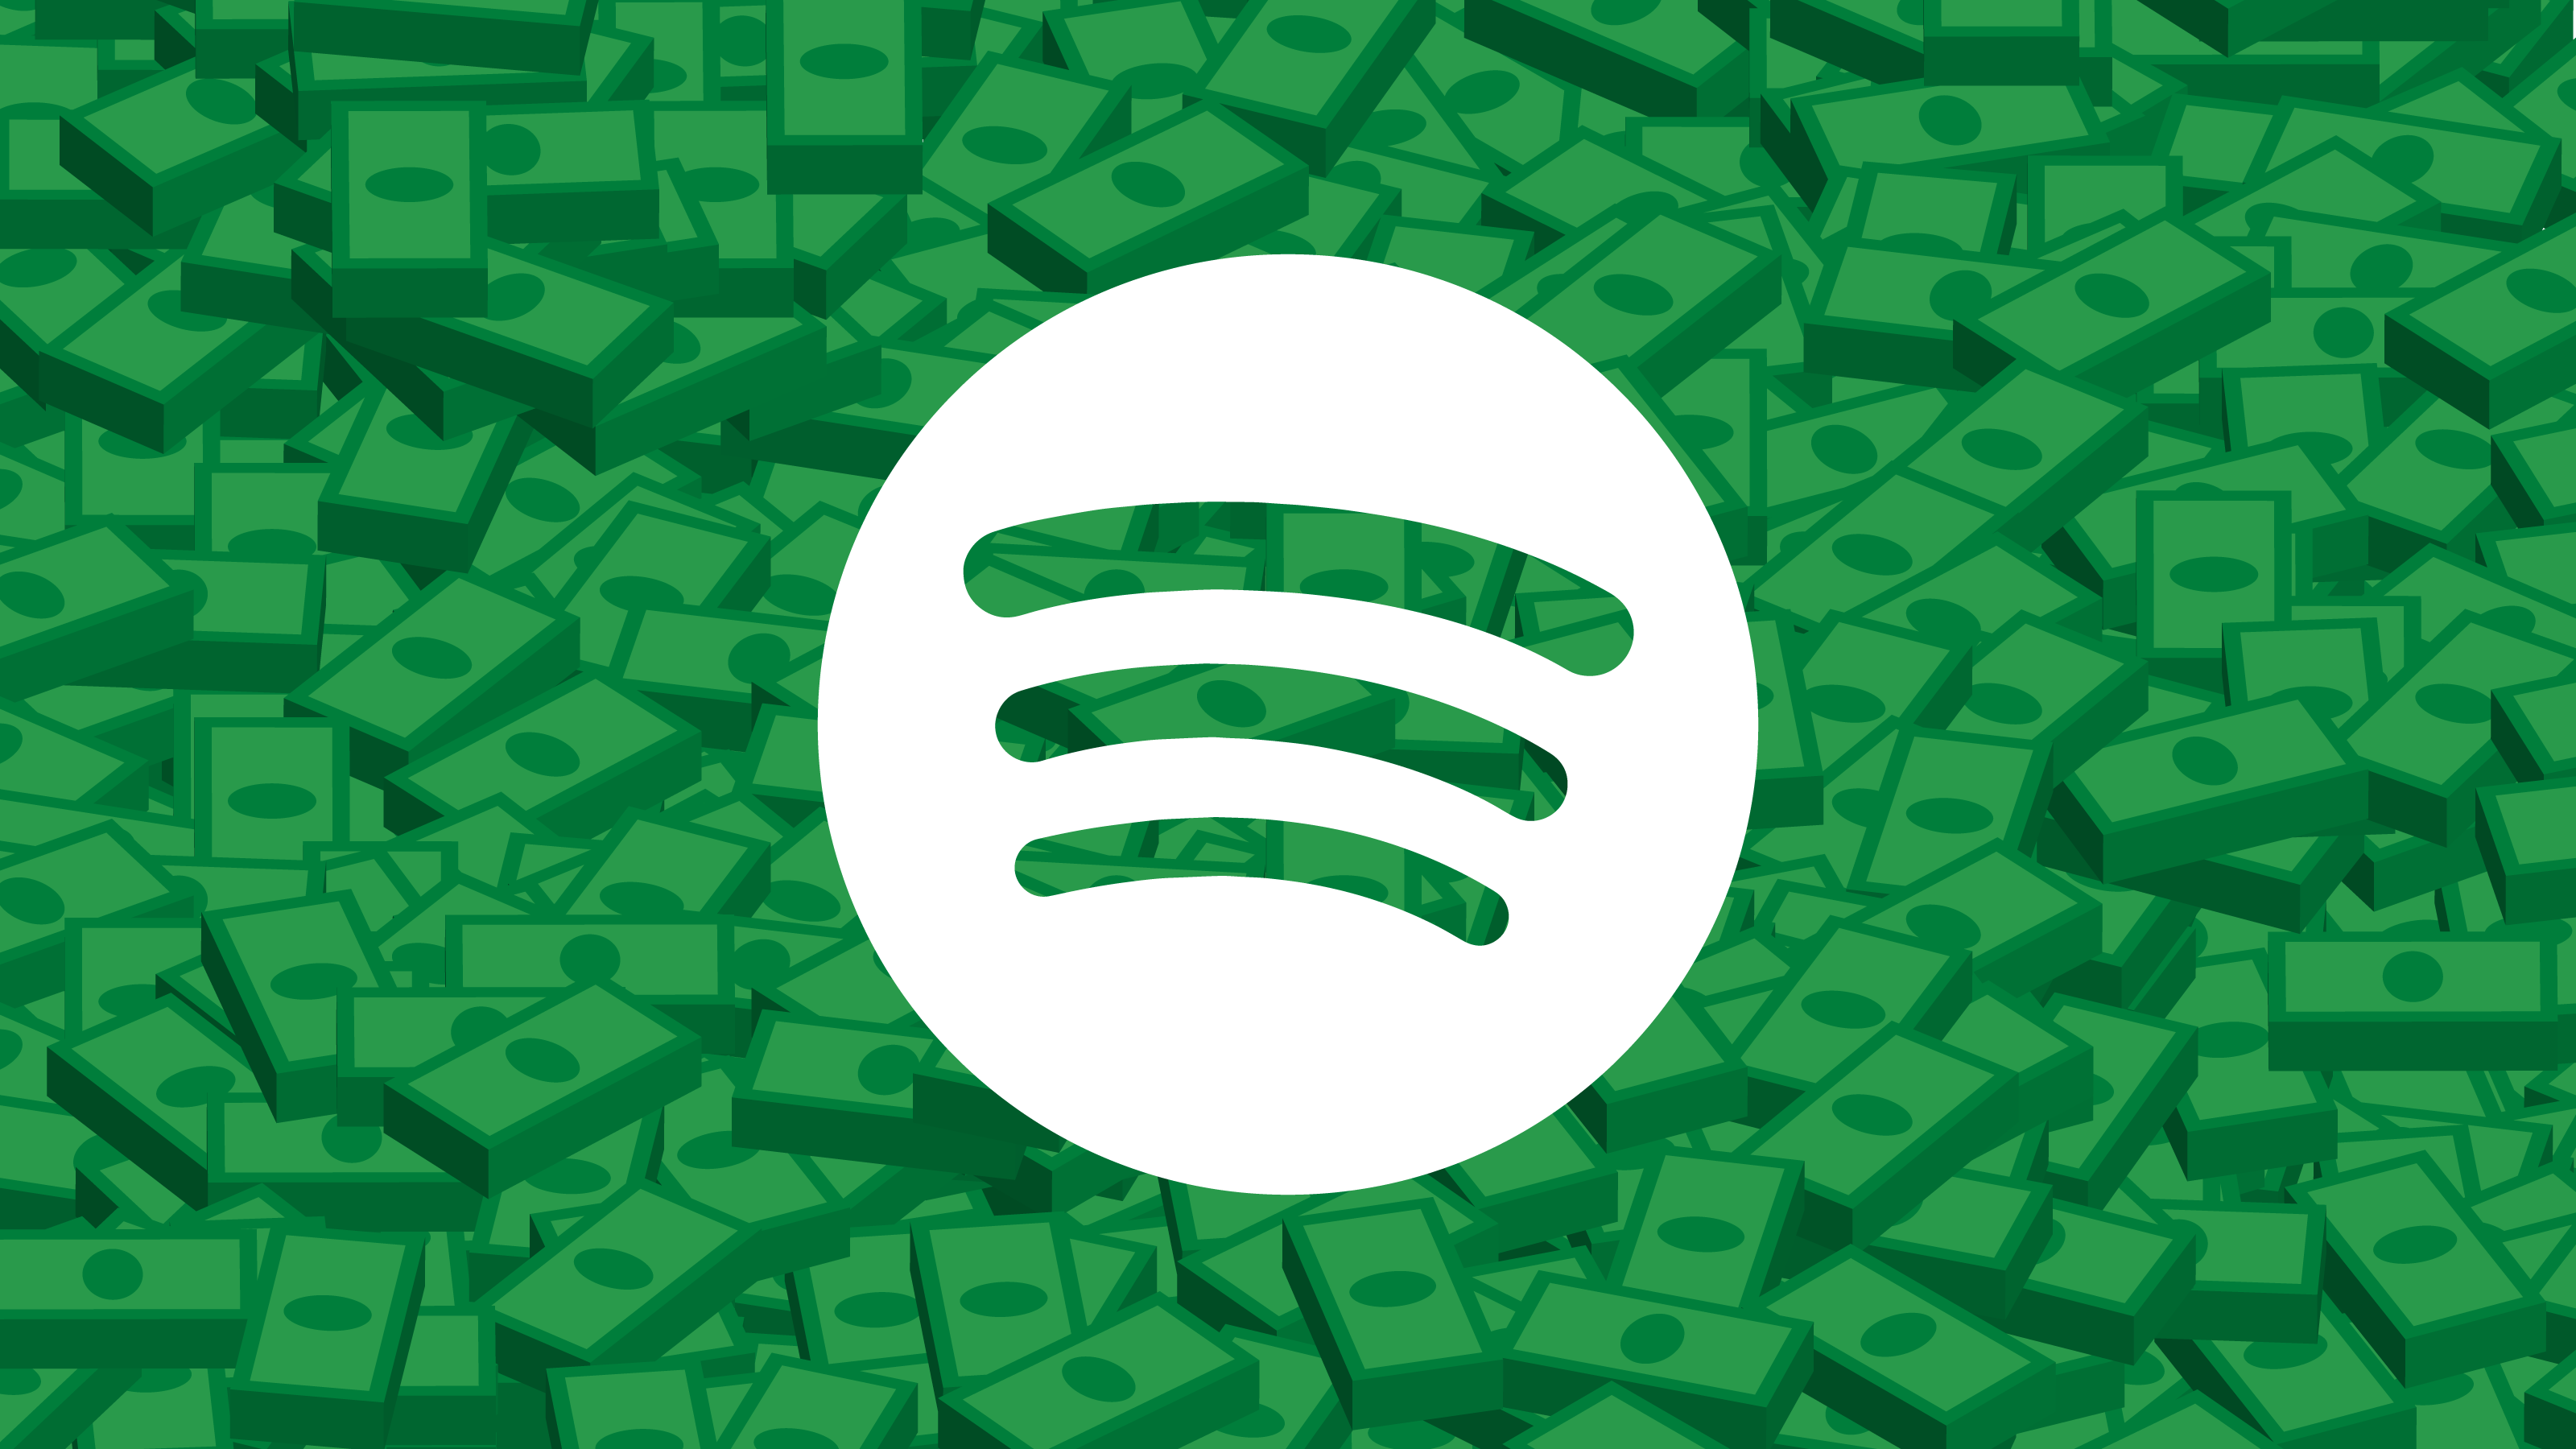 Does Spotify Pay Their Artists Enough?